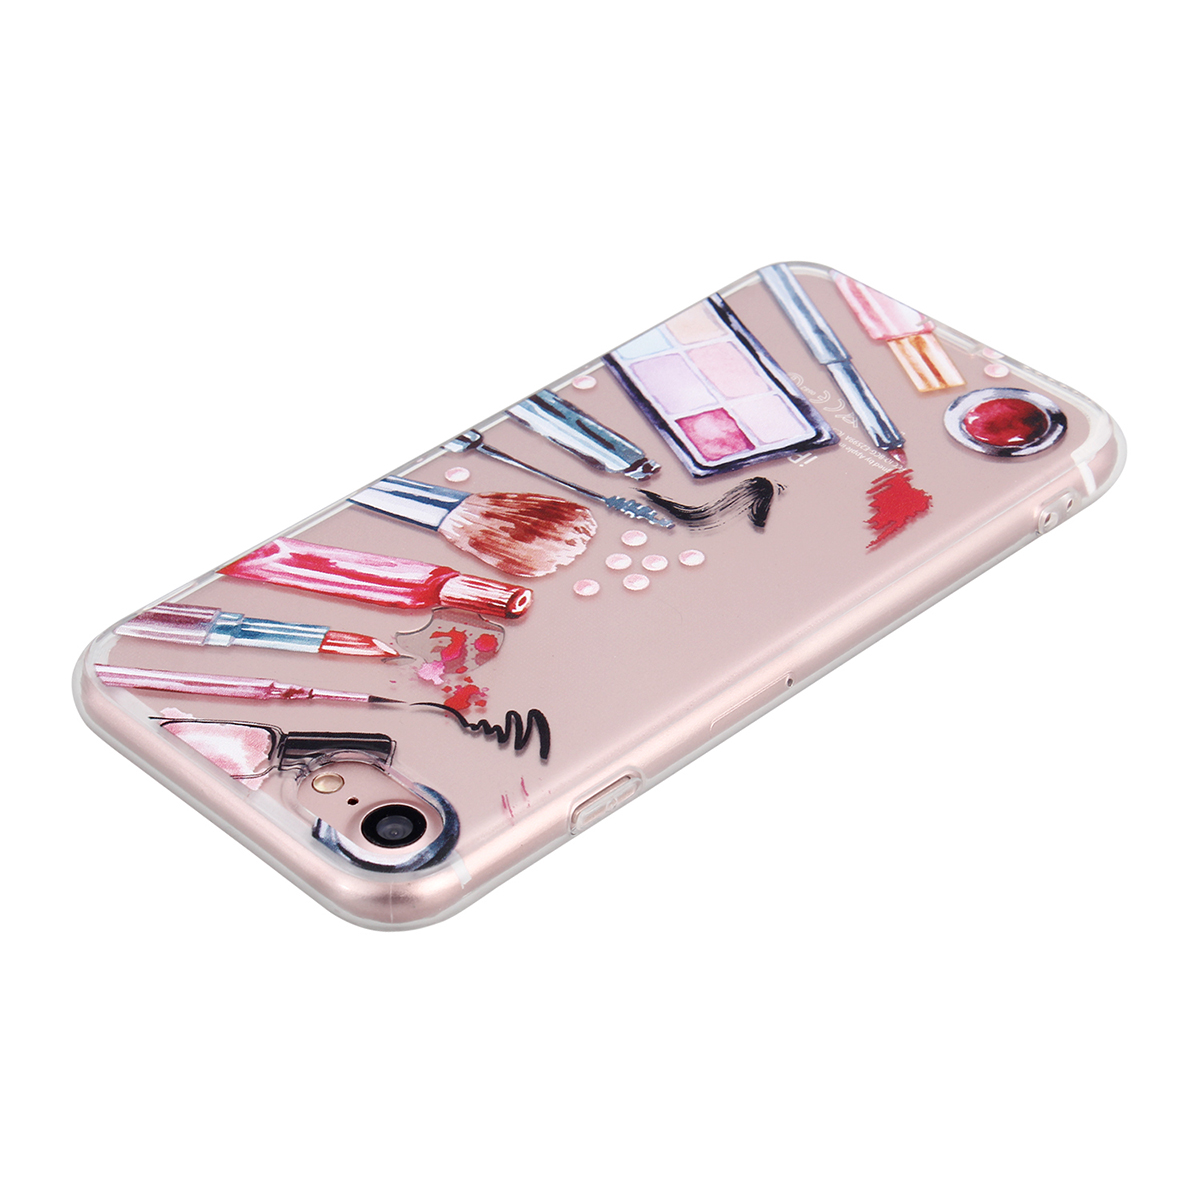 New Slim Soft TPU Transparent Printing Phone Case for iPhone 7 - Beauty Makeup